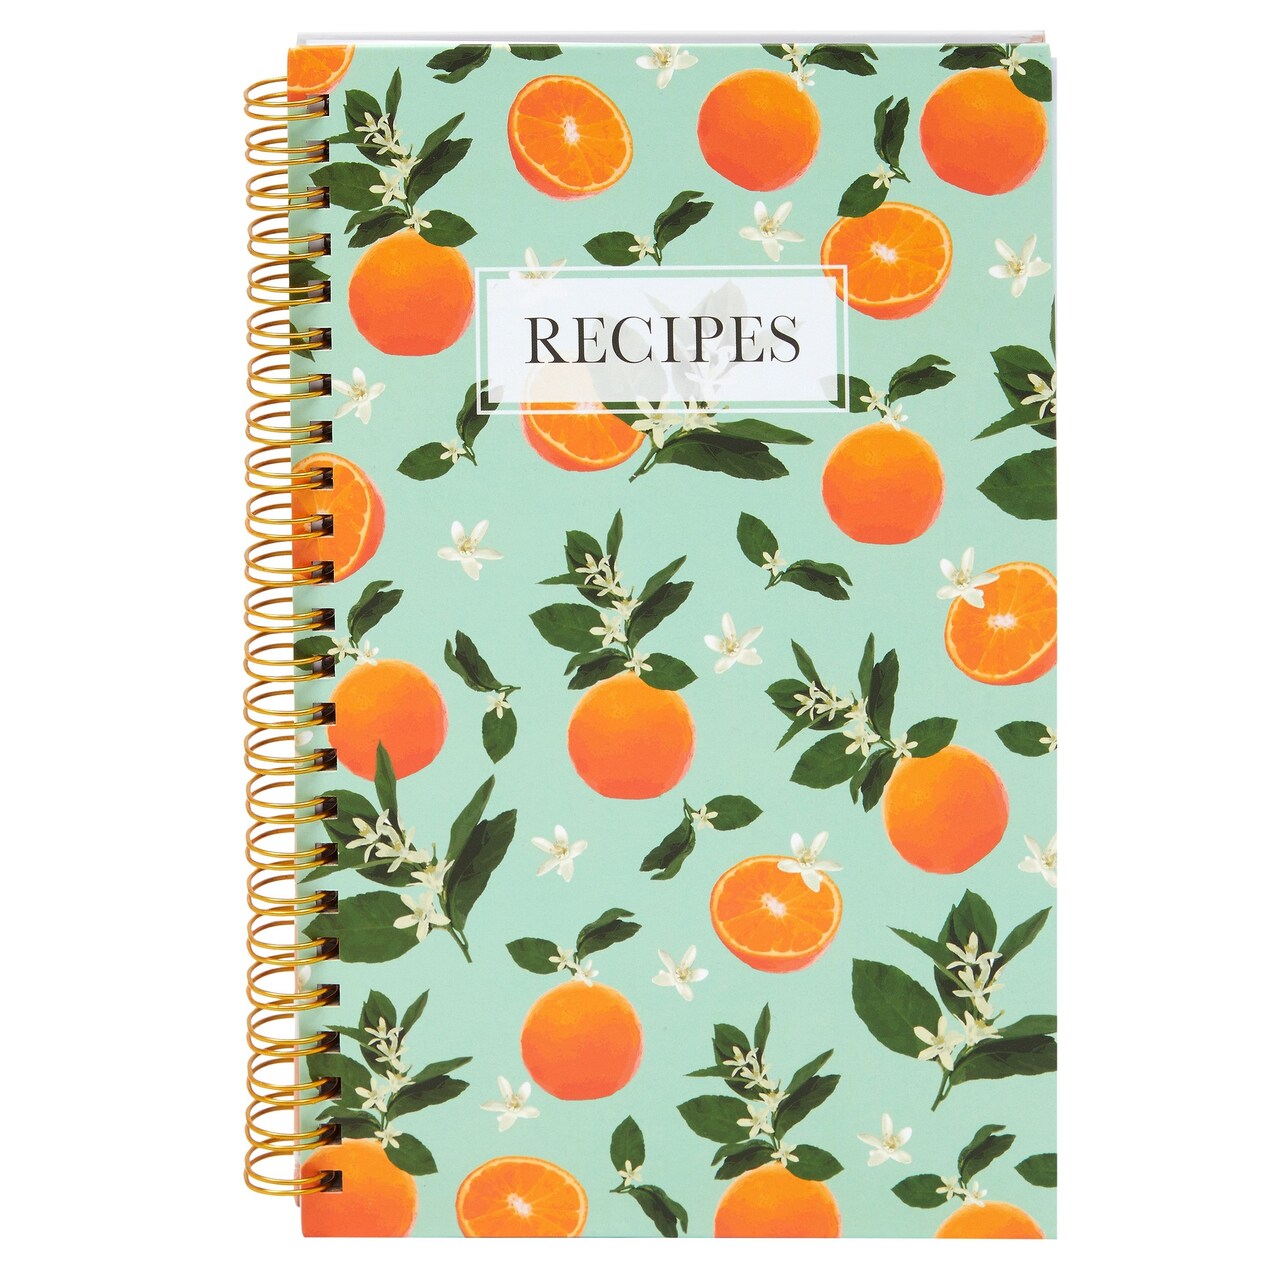 Blank Recipe Book to Write Your Own Recipes, 120 Pages, 60 Sheets, Floral  and Orange Theme, 8 Sections to Organize Your Recipes, Glossy Laminated